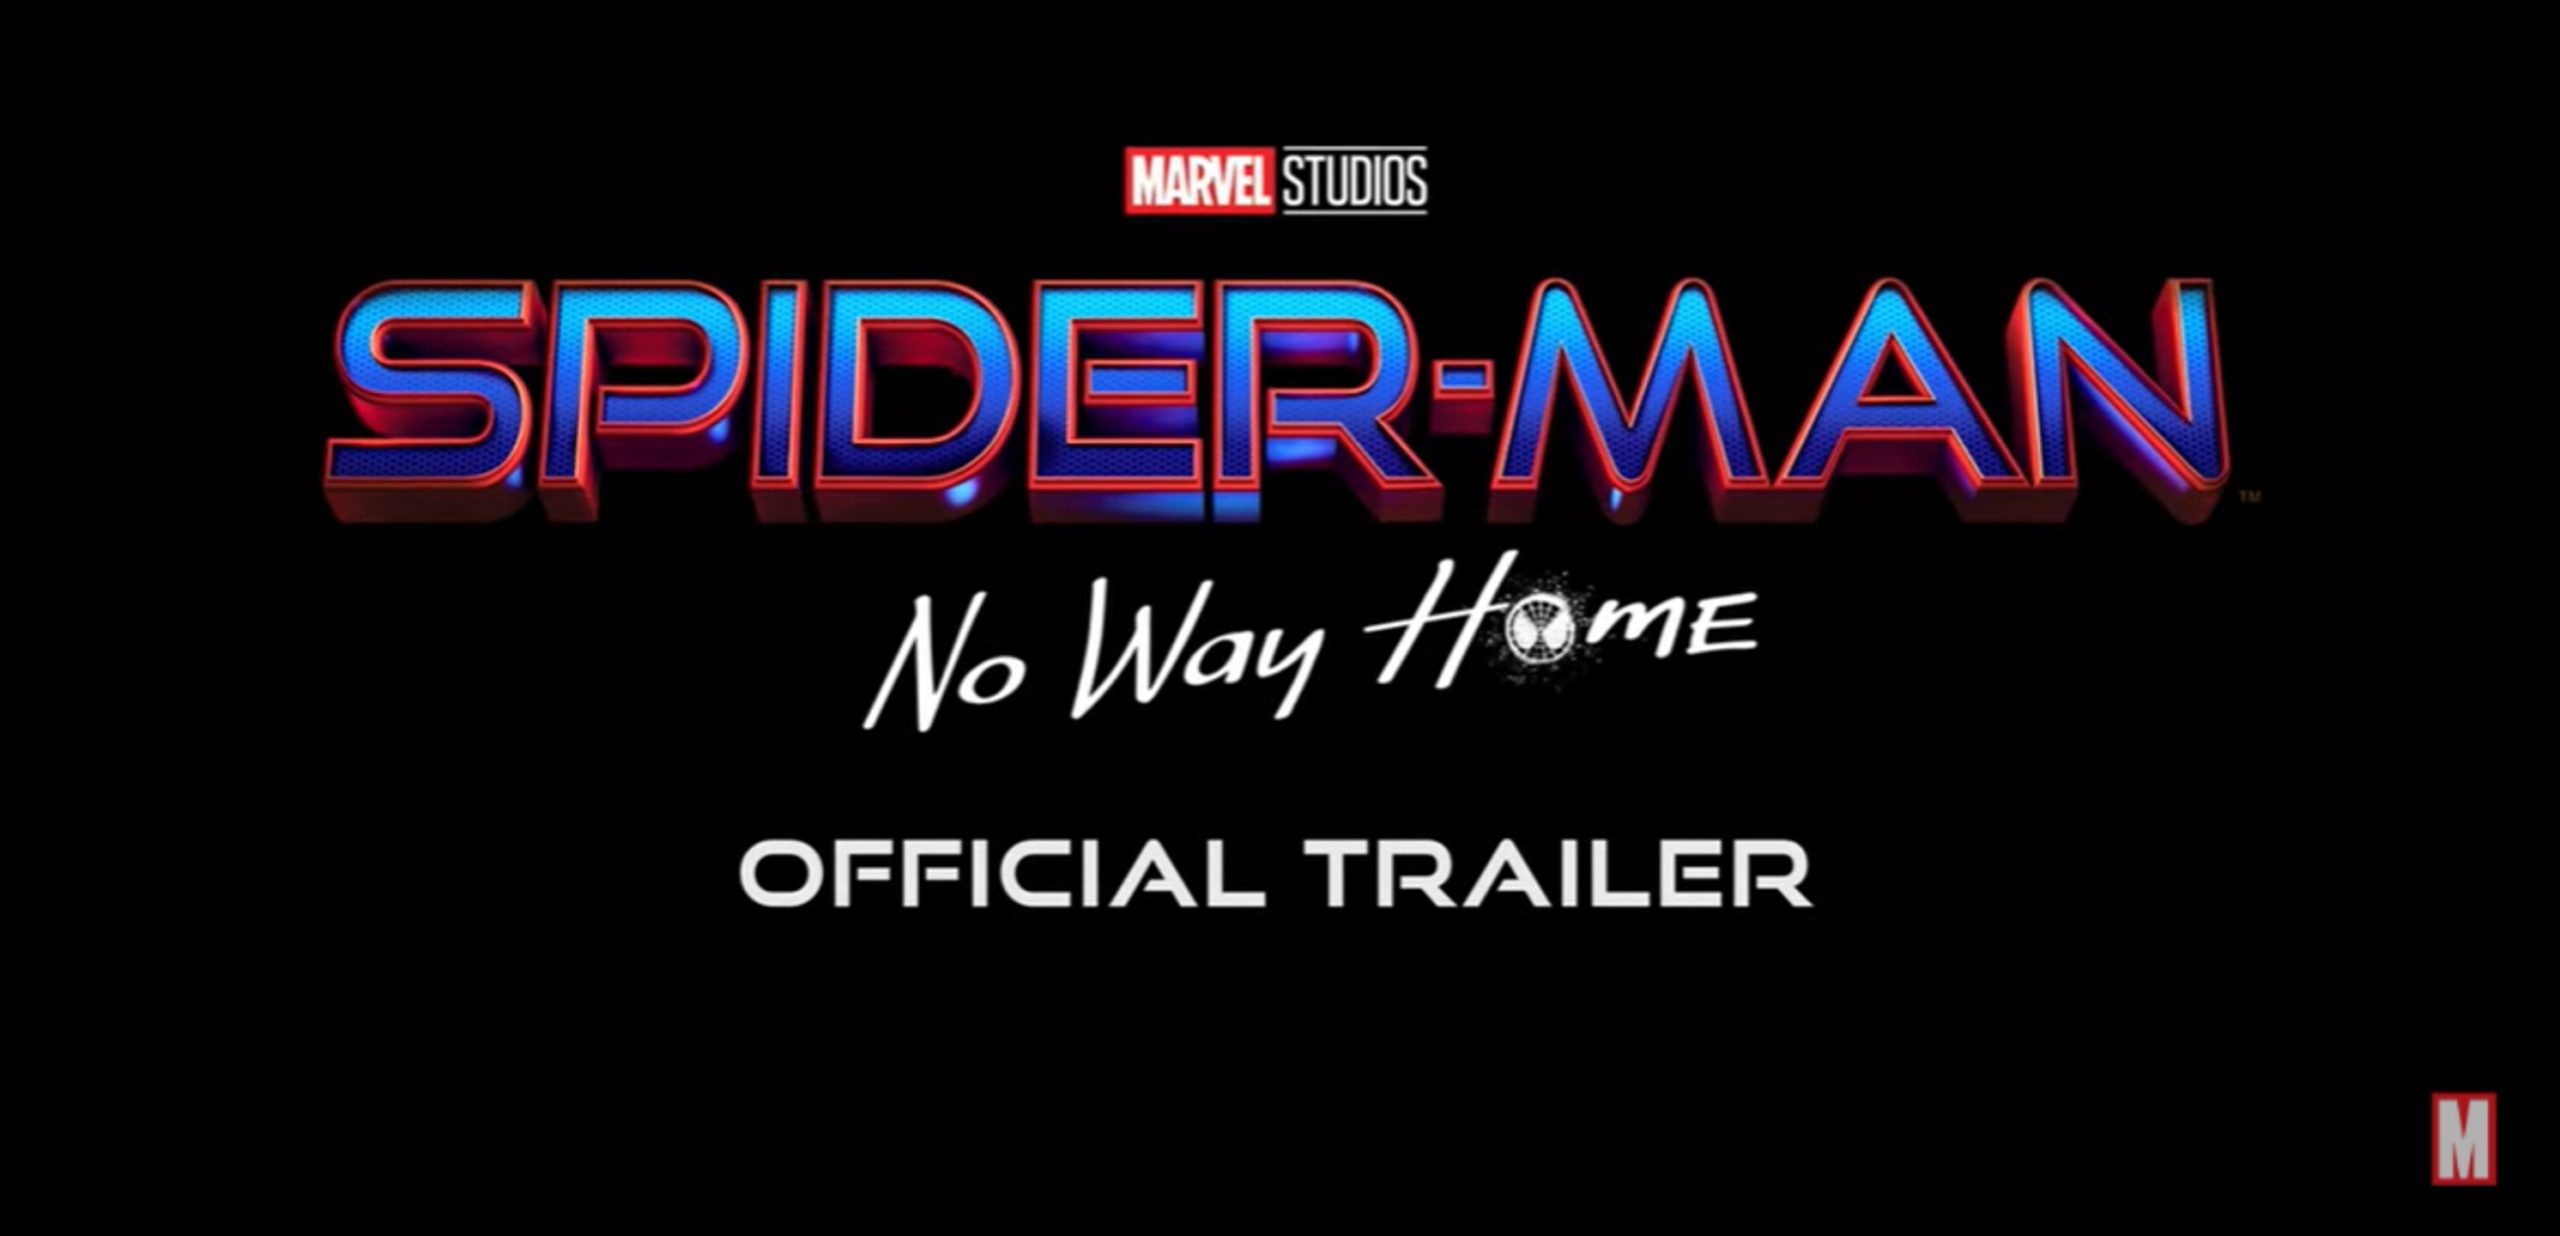 No Way Home Trailer Finally Drops, But With Just the One Spider-Man